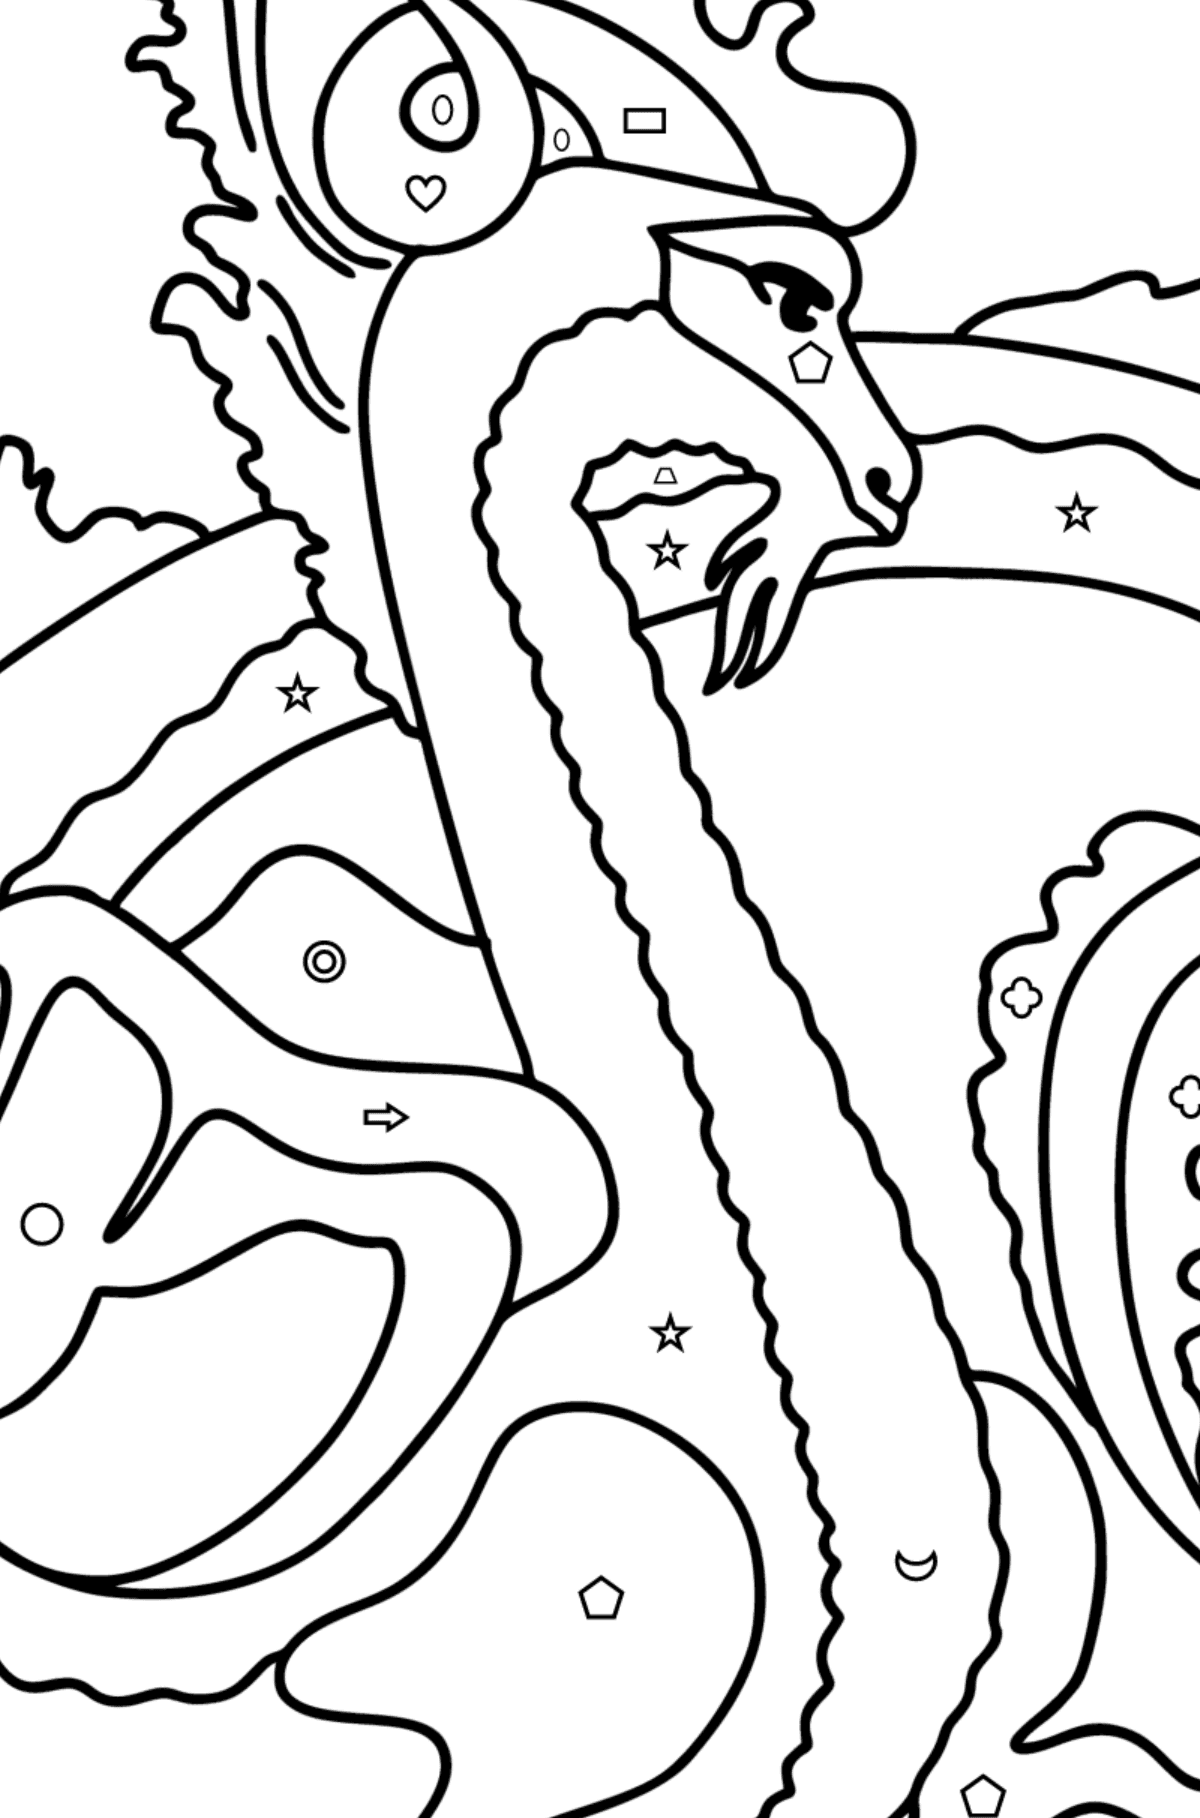 Mythical Dragon coloring page - Coloring by Geometric Shapes for Kids